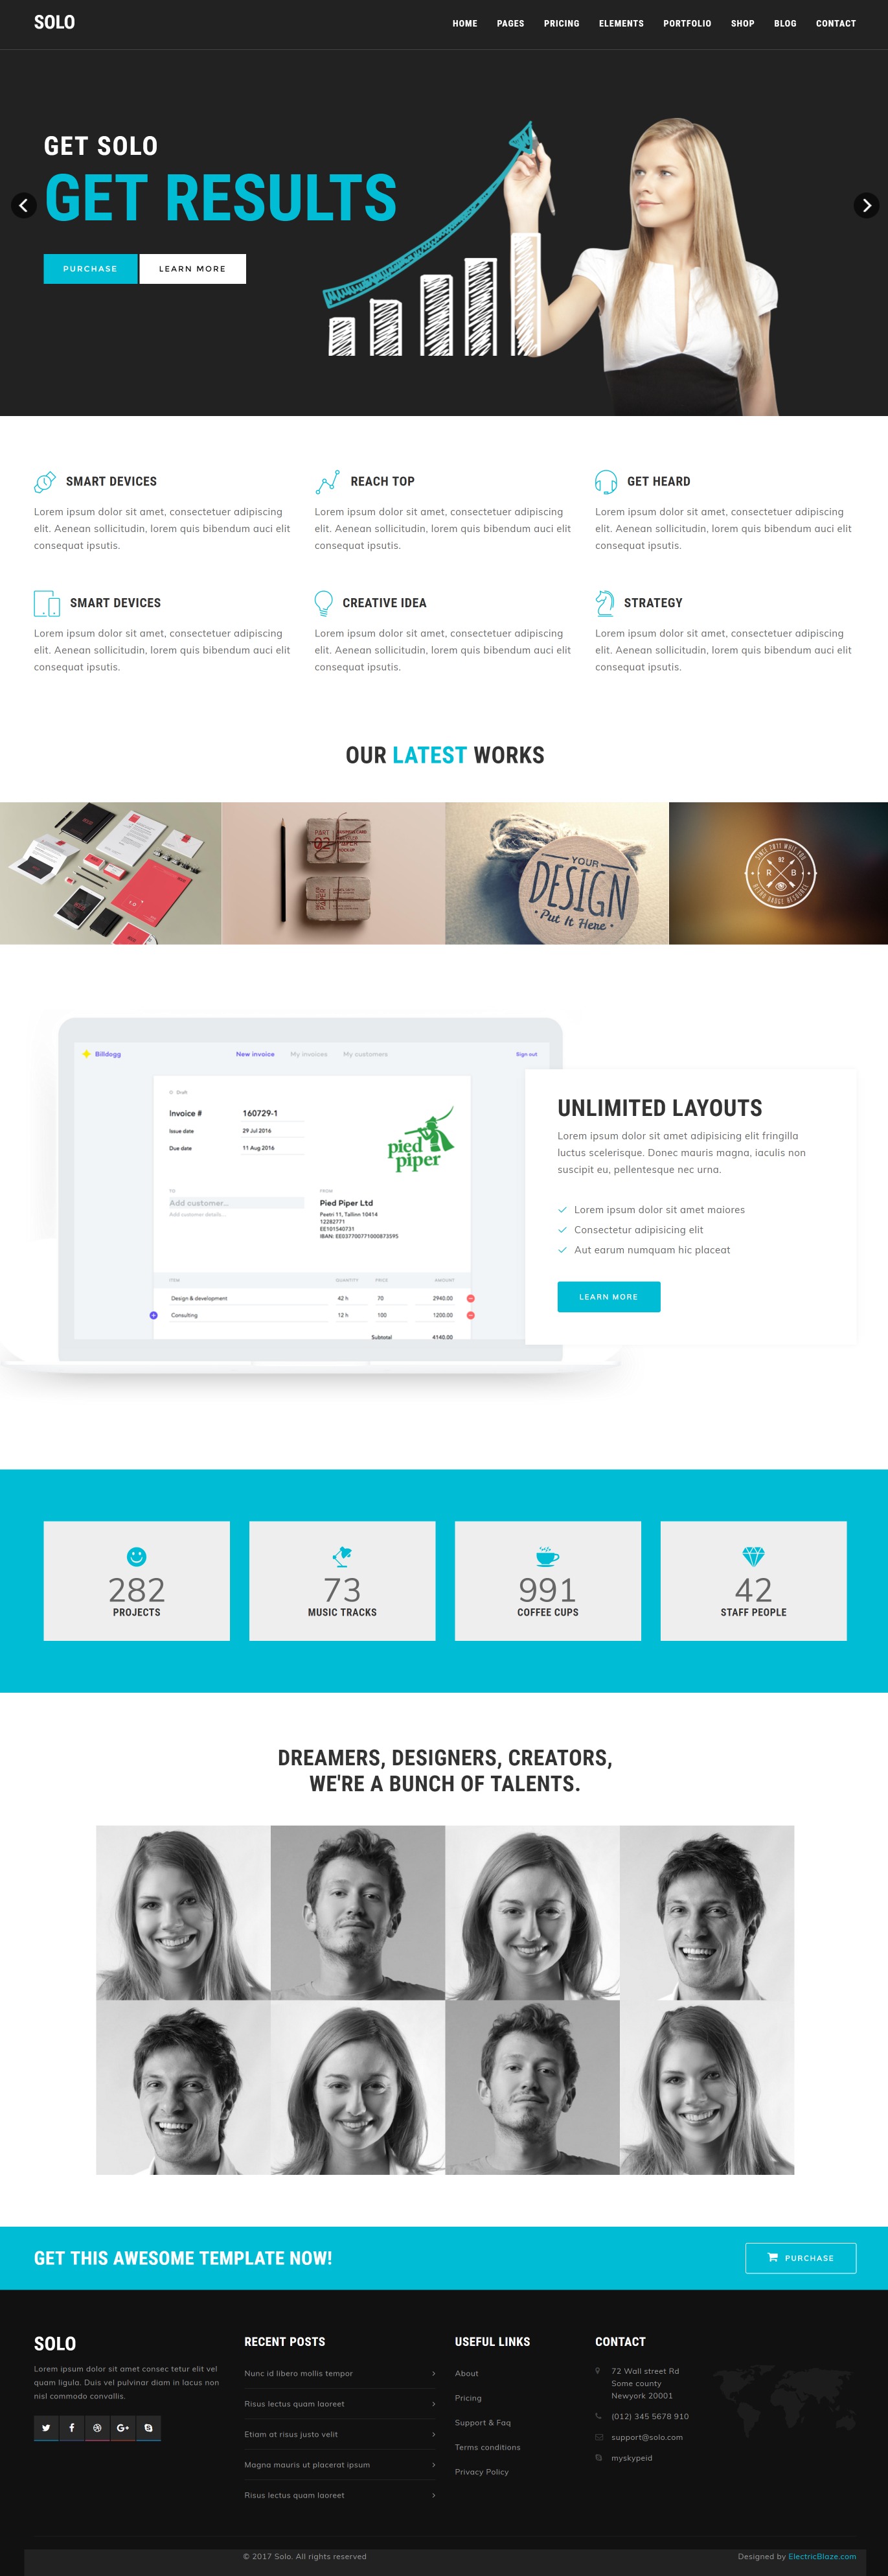 Solo - 103+ Pages HTML Bootstrap Template - 3